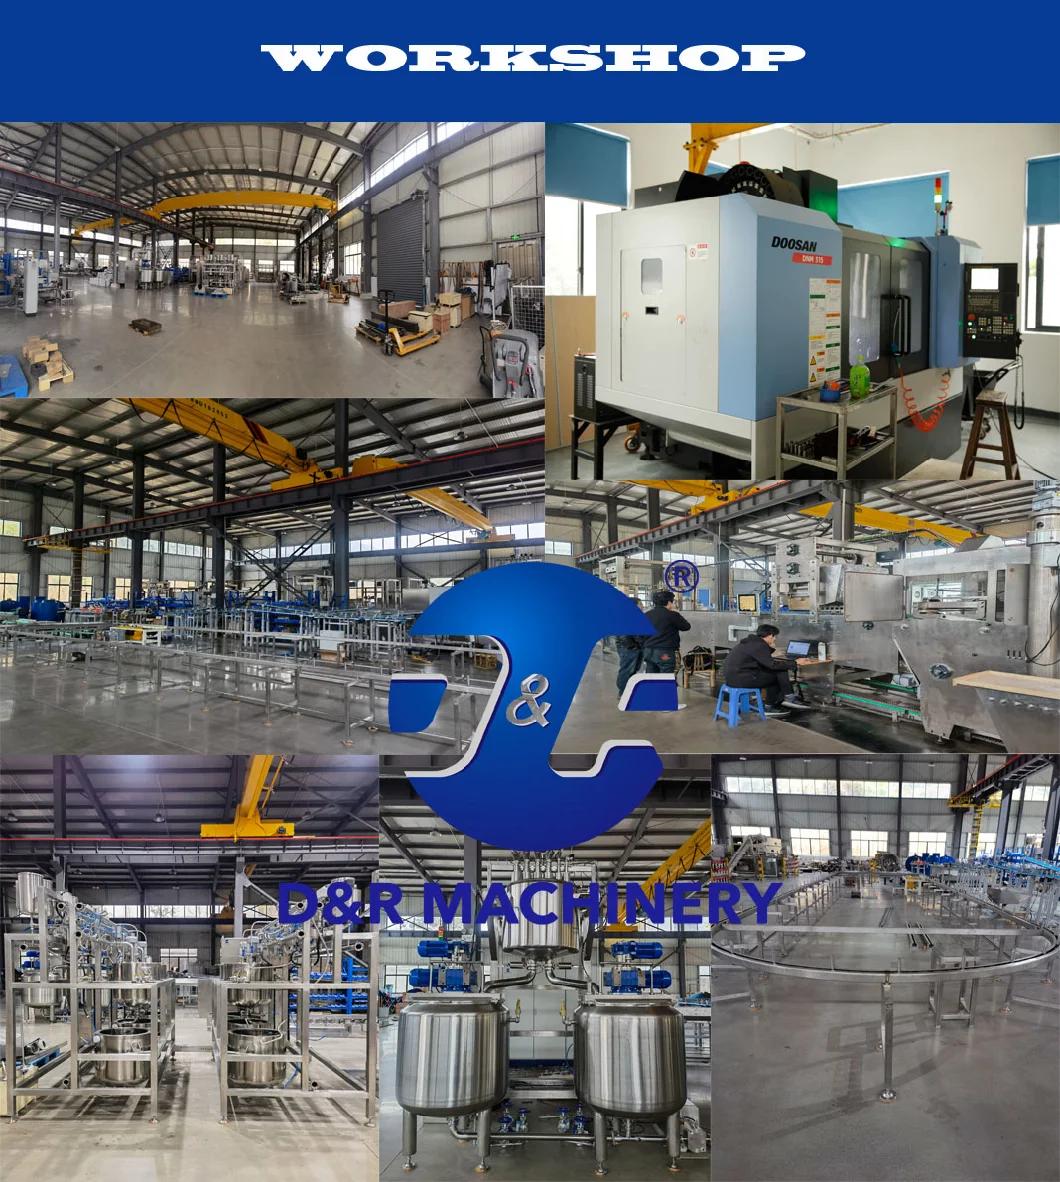 Die Forming Automatic Soft Candy Machine